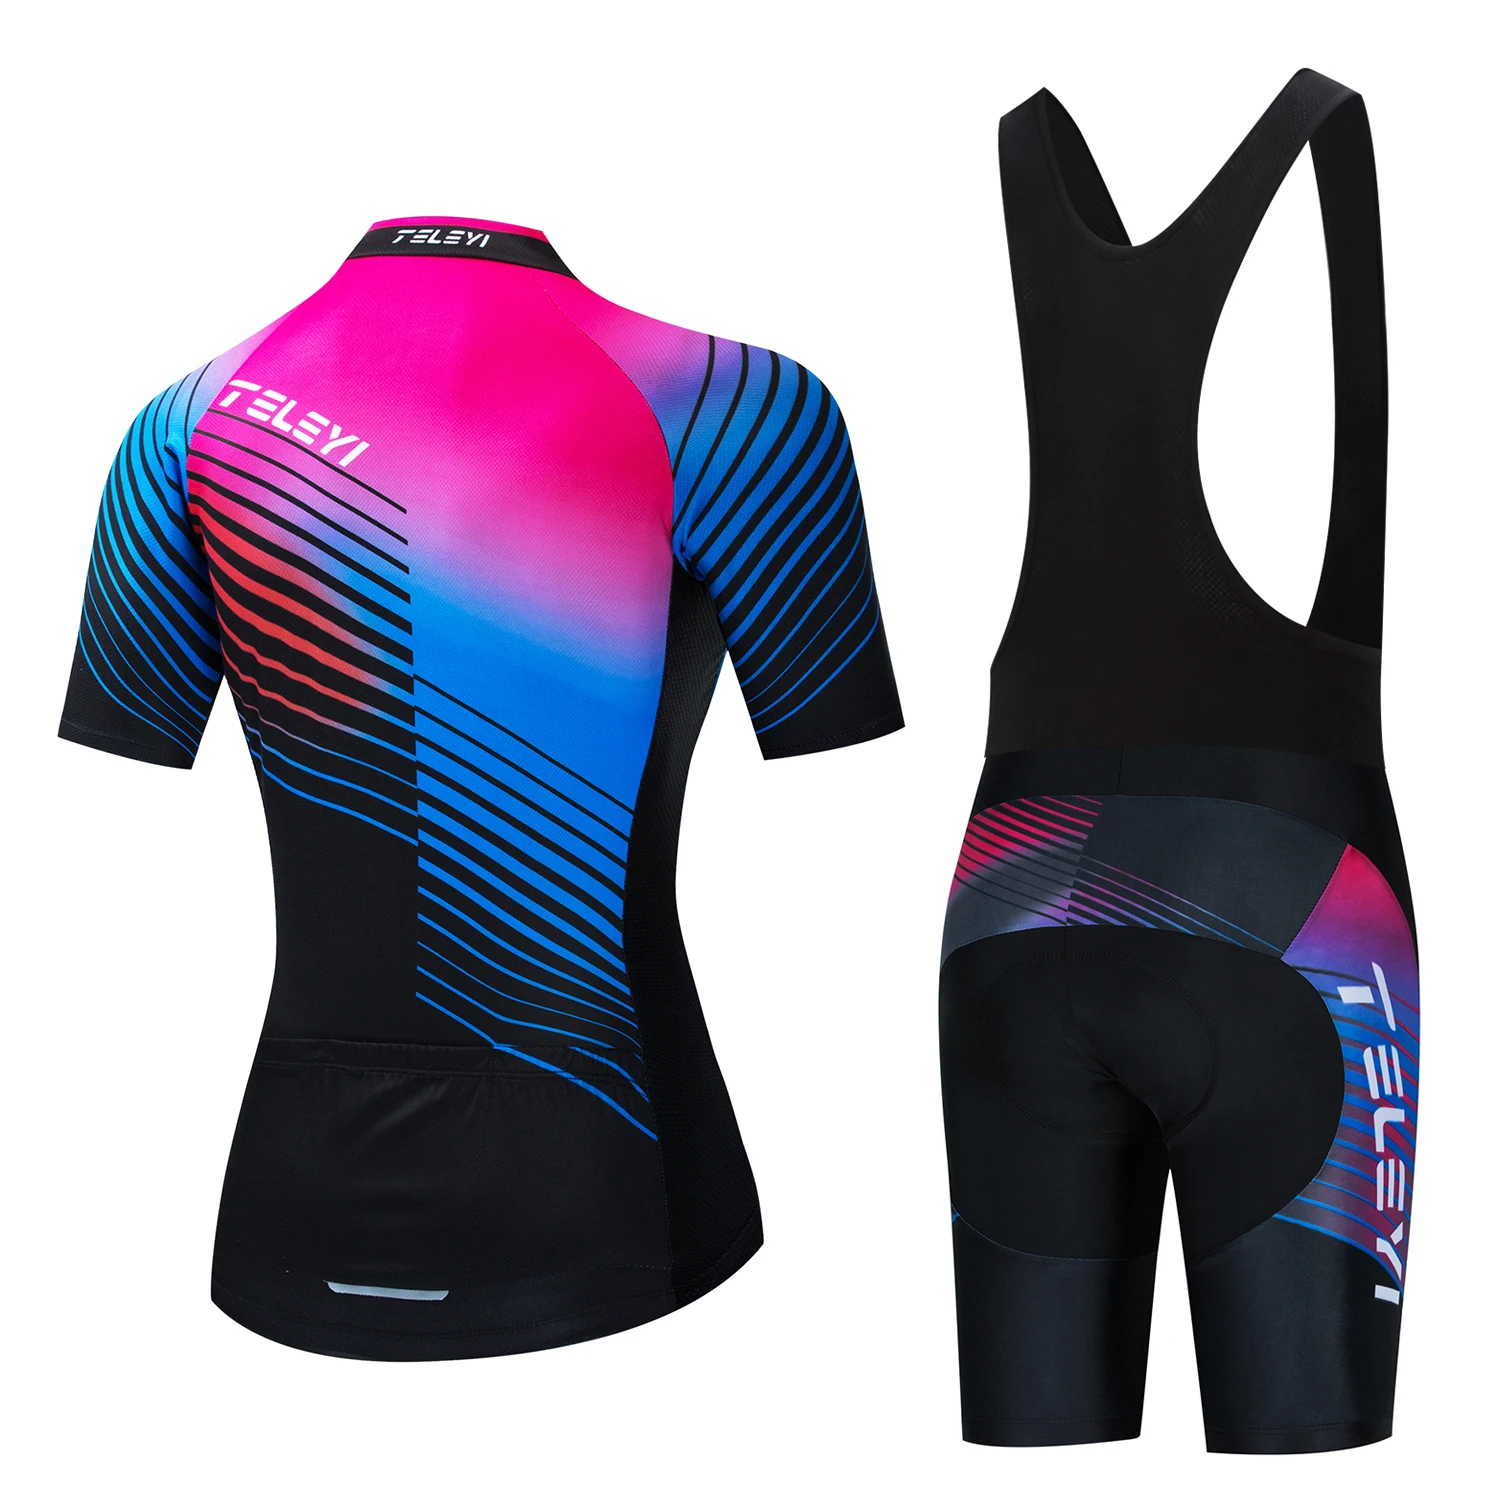 teleyi Pro Team Cycling Jersey Set Women Summer Bike Clothes MTB Ropa Ciclismo Bicycle Uniforme Maillot Quick Dry 5D Pad